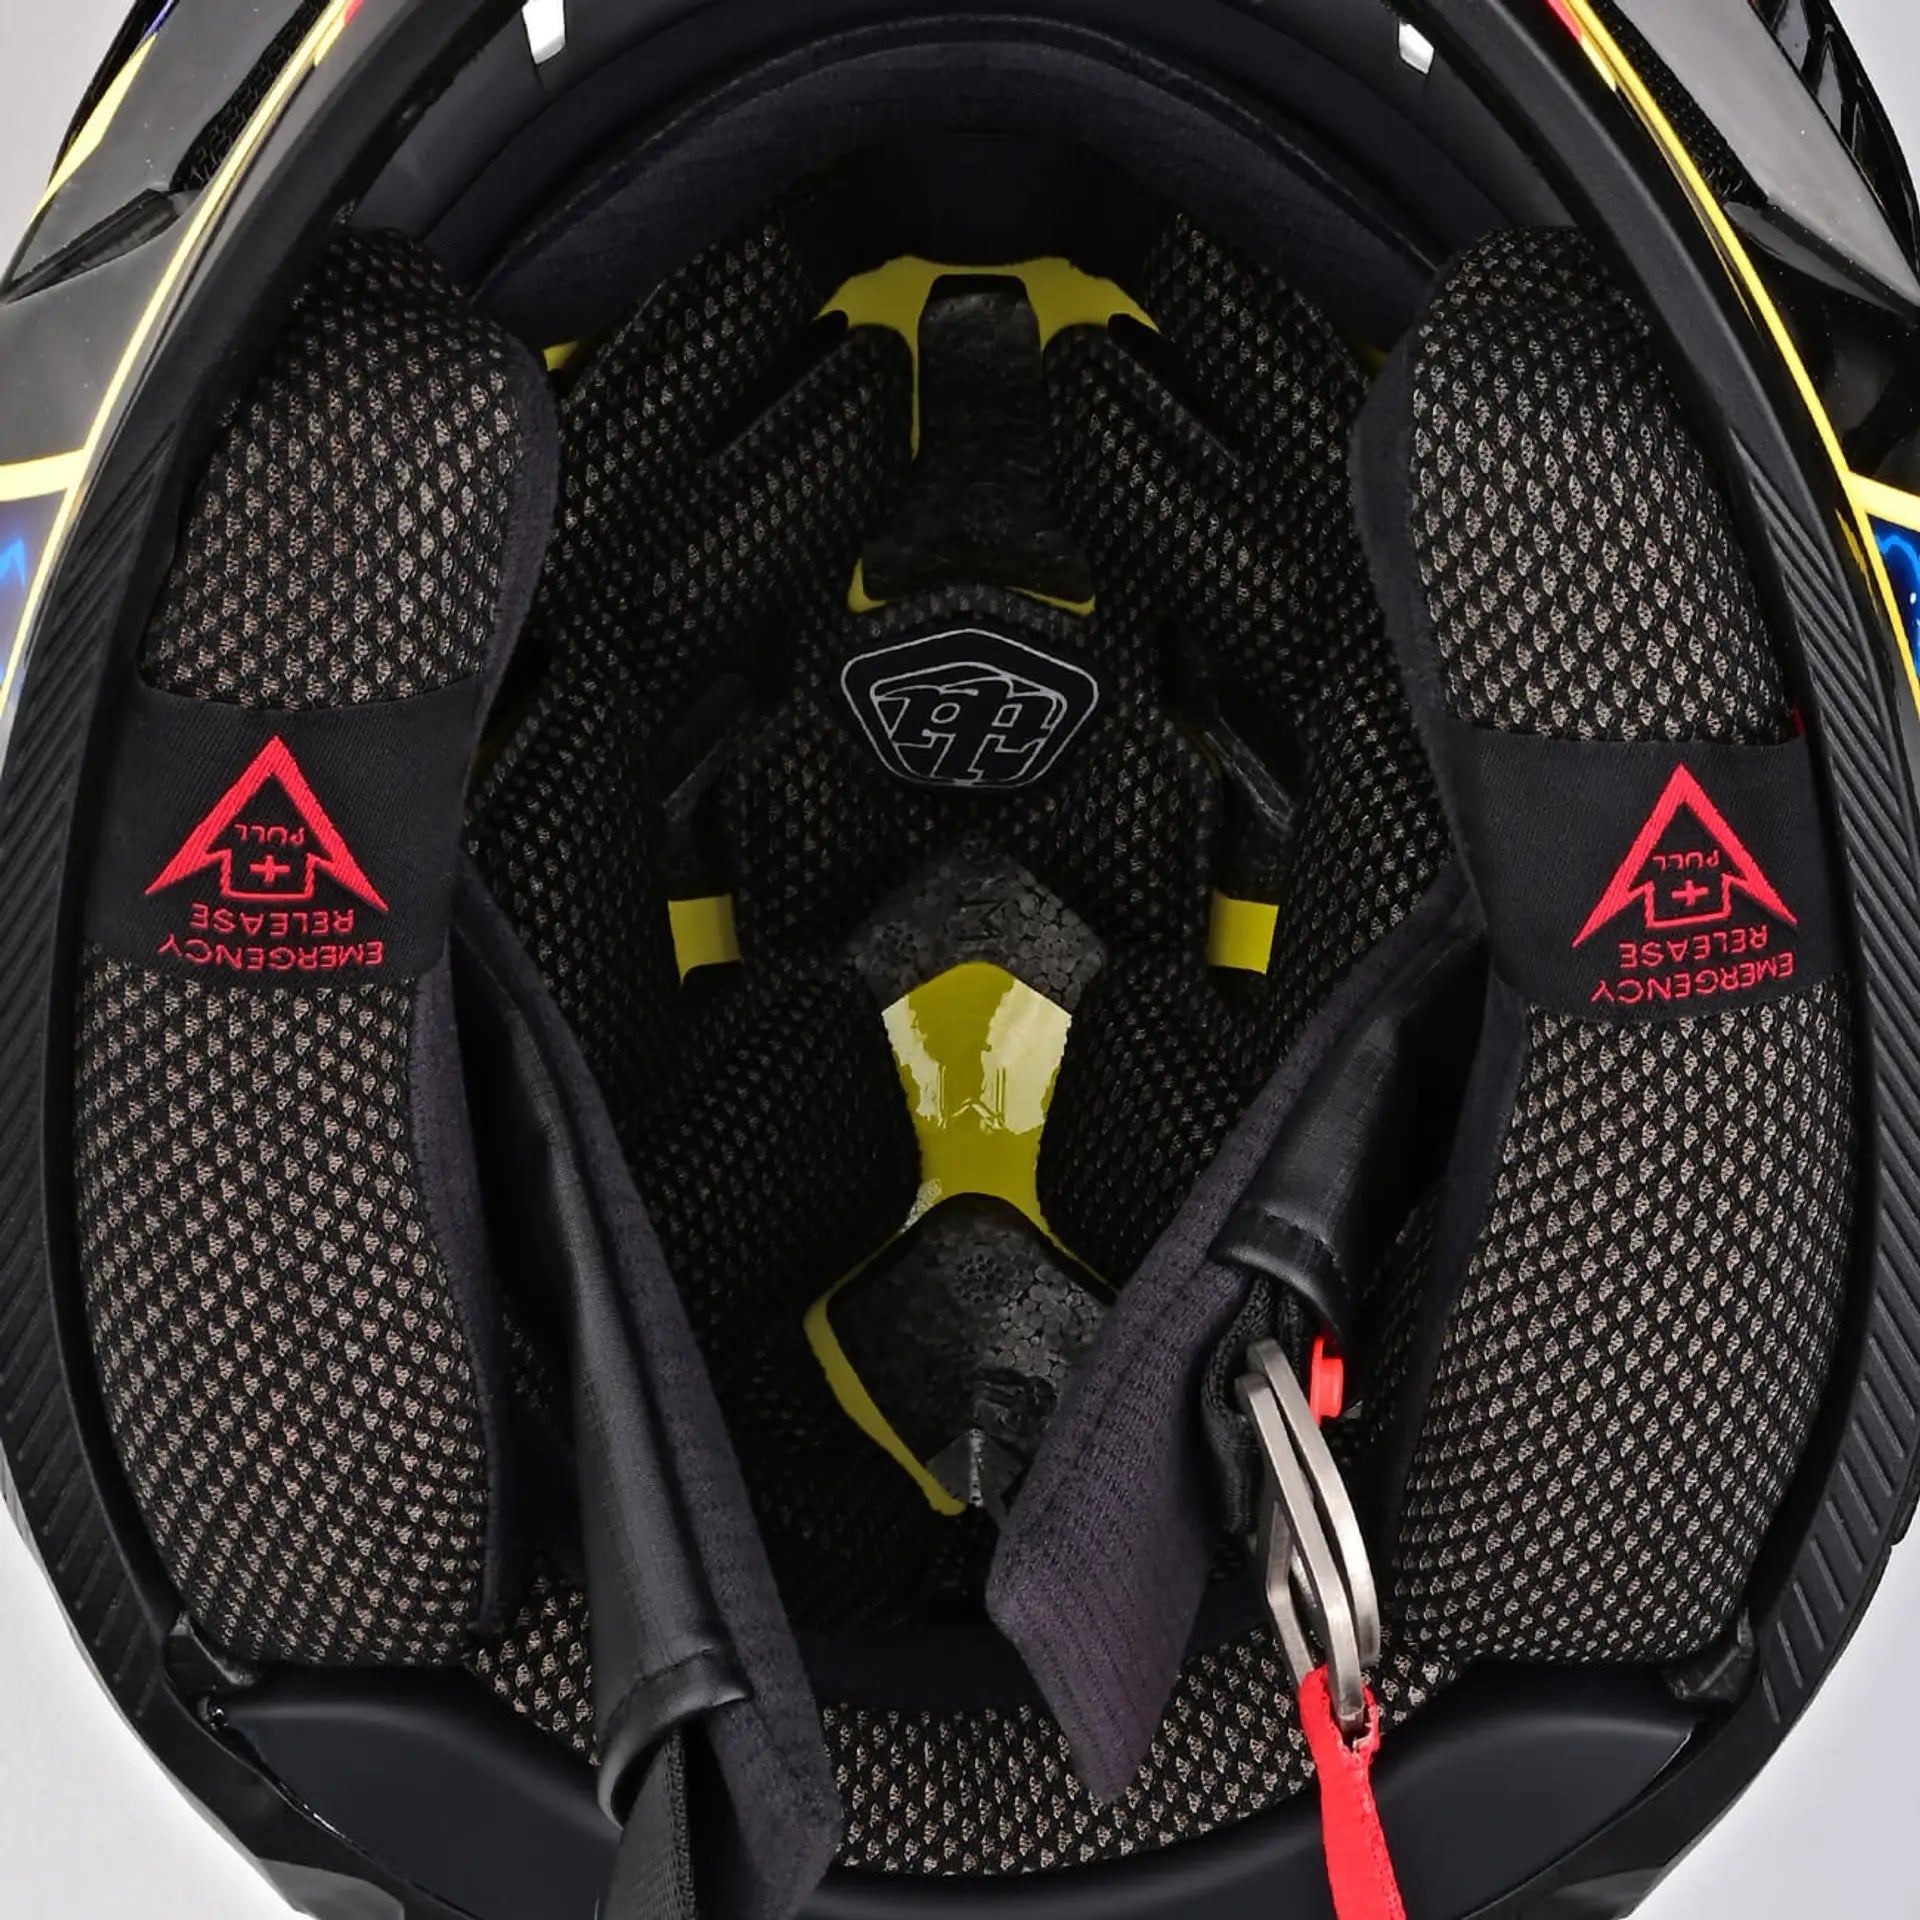 Troy Lee Designs D4 Carbon Full Face Helmet with MIPS - Reverb